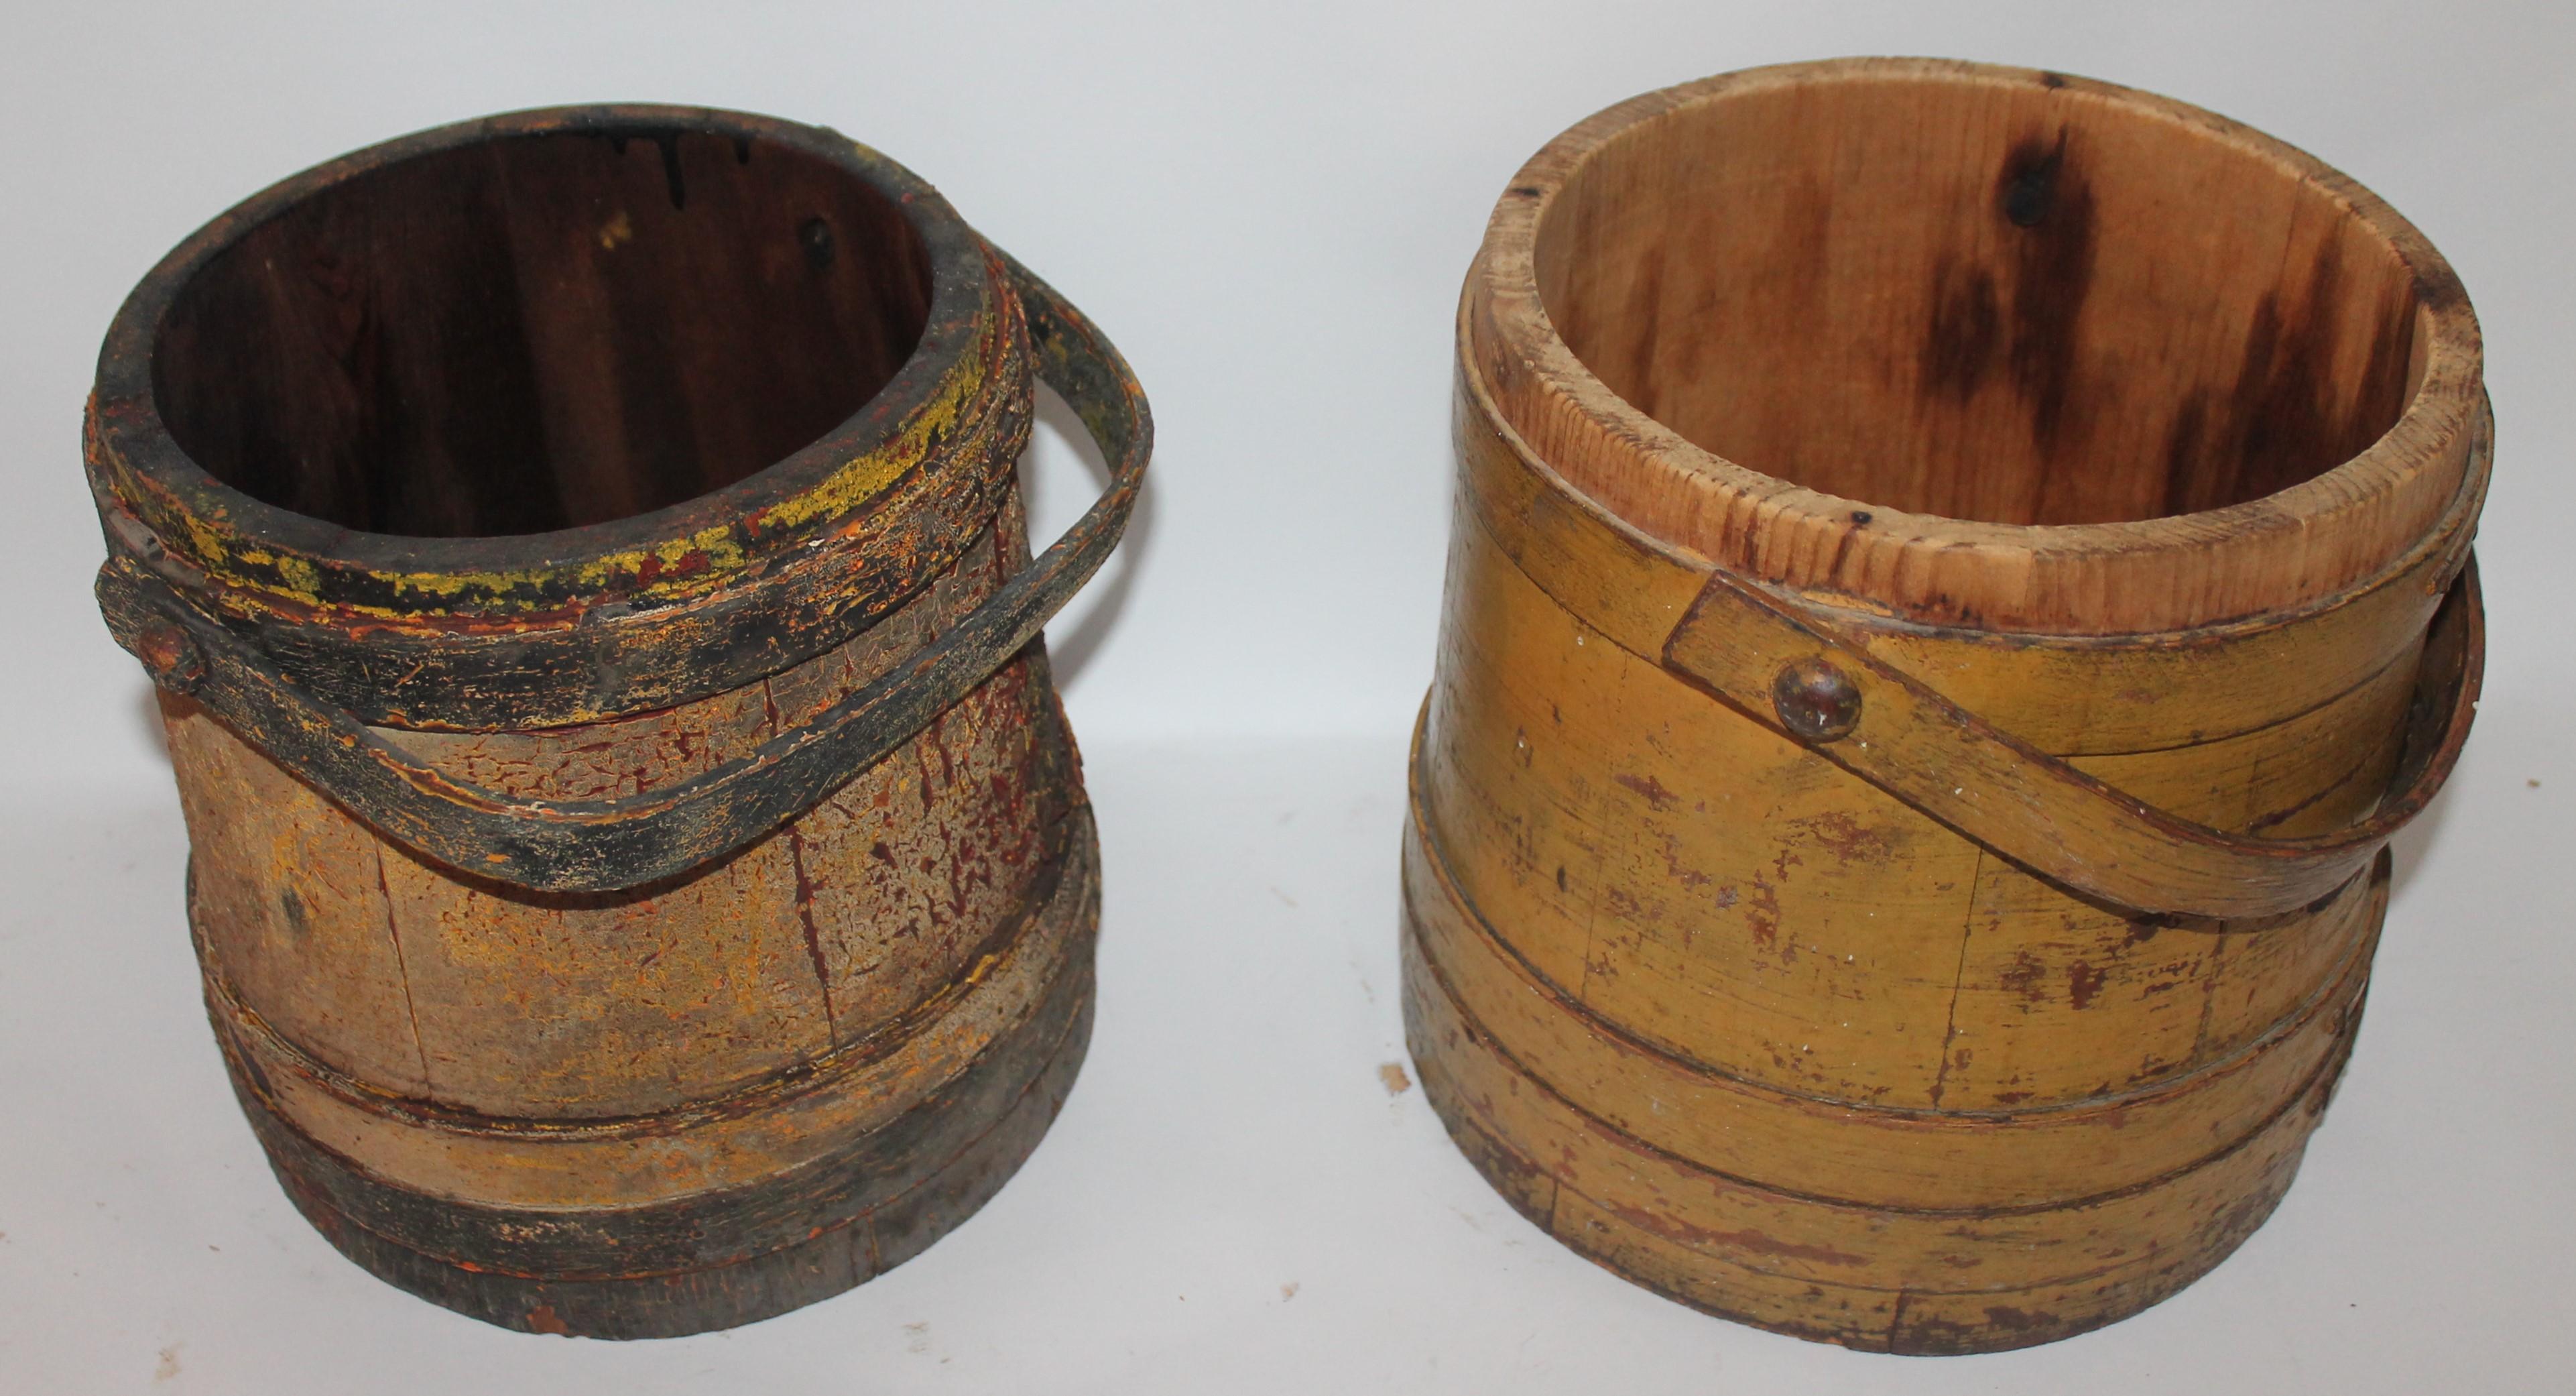 These two 19th century original painted handled buckets of furkins without lids. The condition are very good with amazing grungy untouched surface. Both buckets are tight and strong. Make fantastic trash containers or shelf models.

Measures: